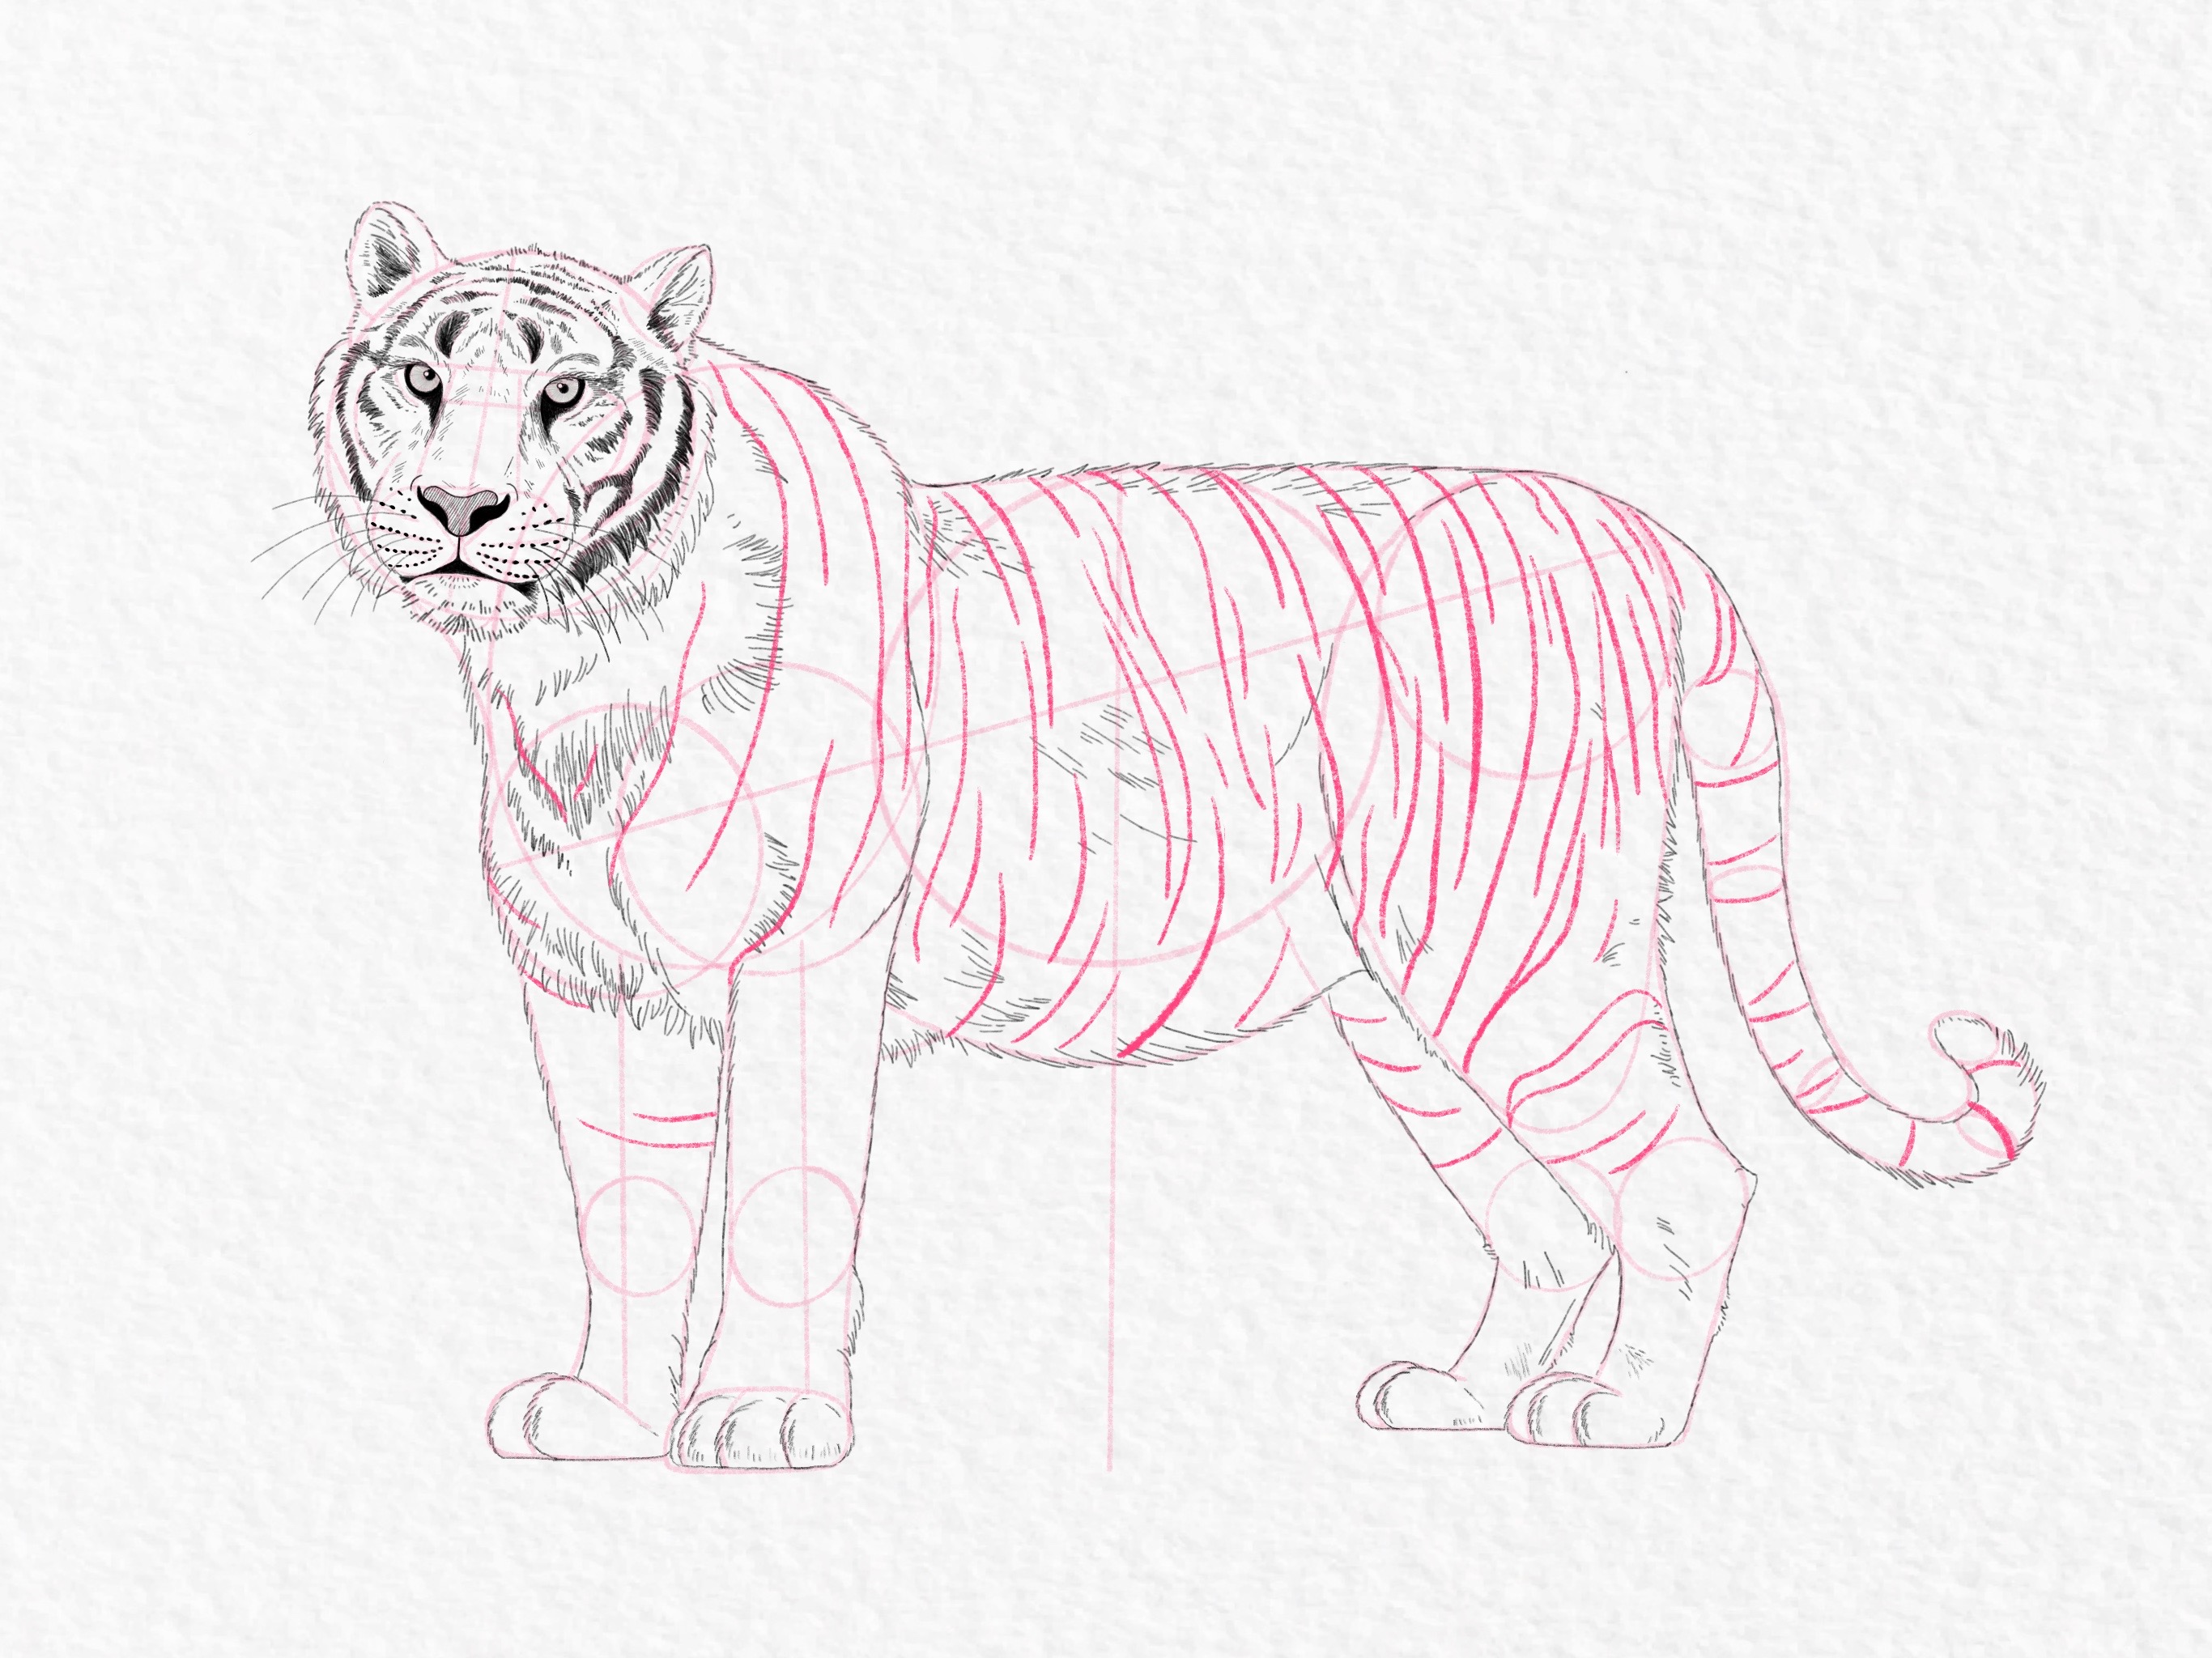 How to draw a tiger, step by step tutorial - step 42a